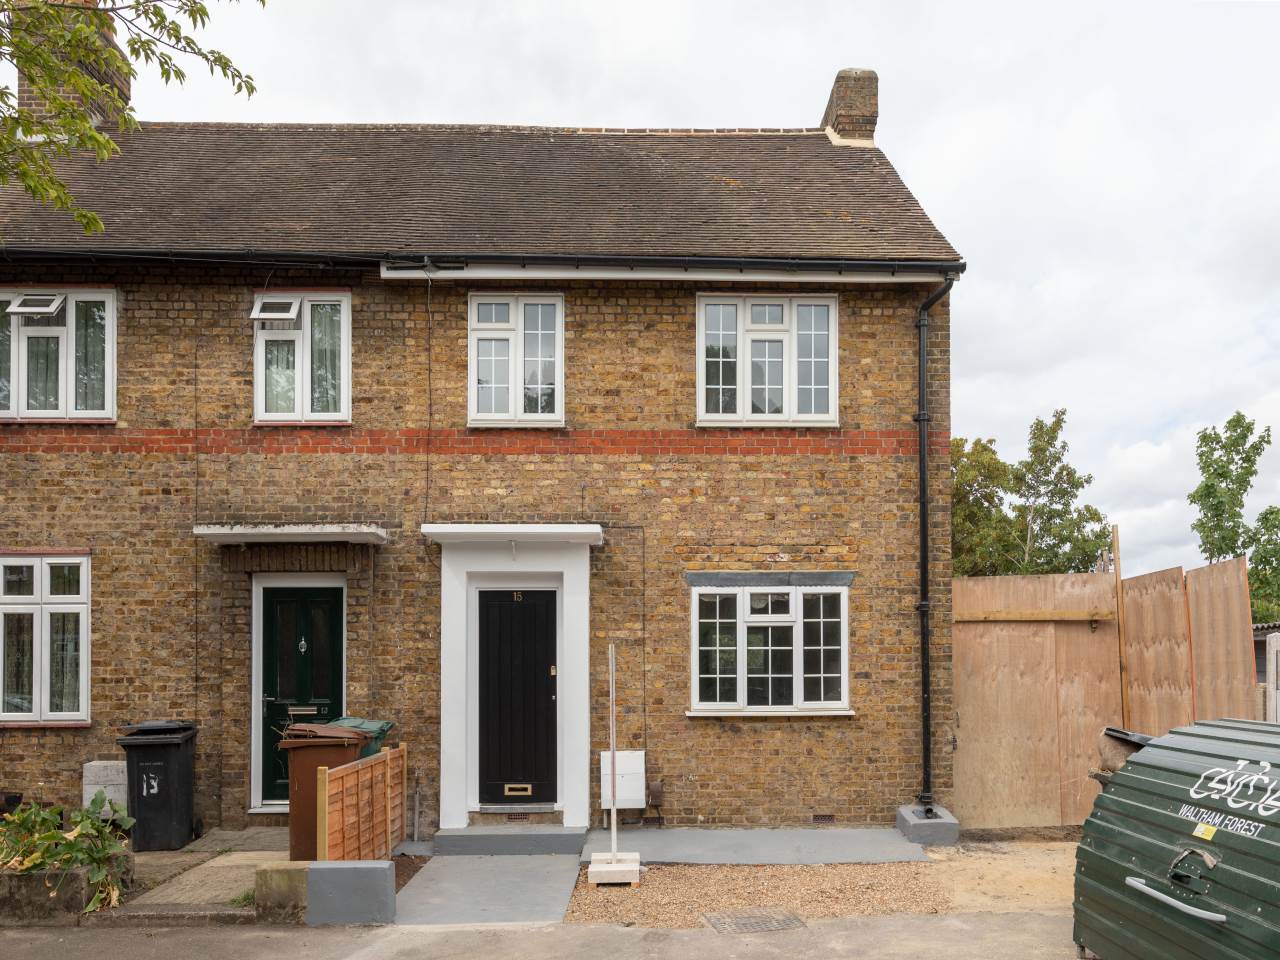 3 bed house for sale in Lewis Avenue, Walthamstow, E17 